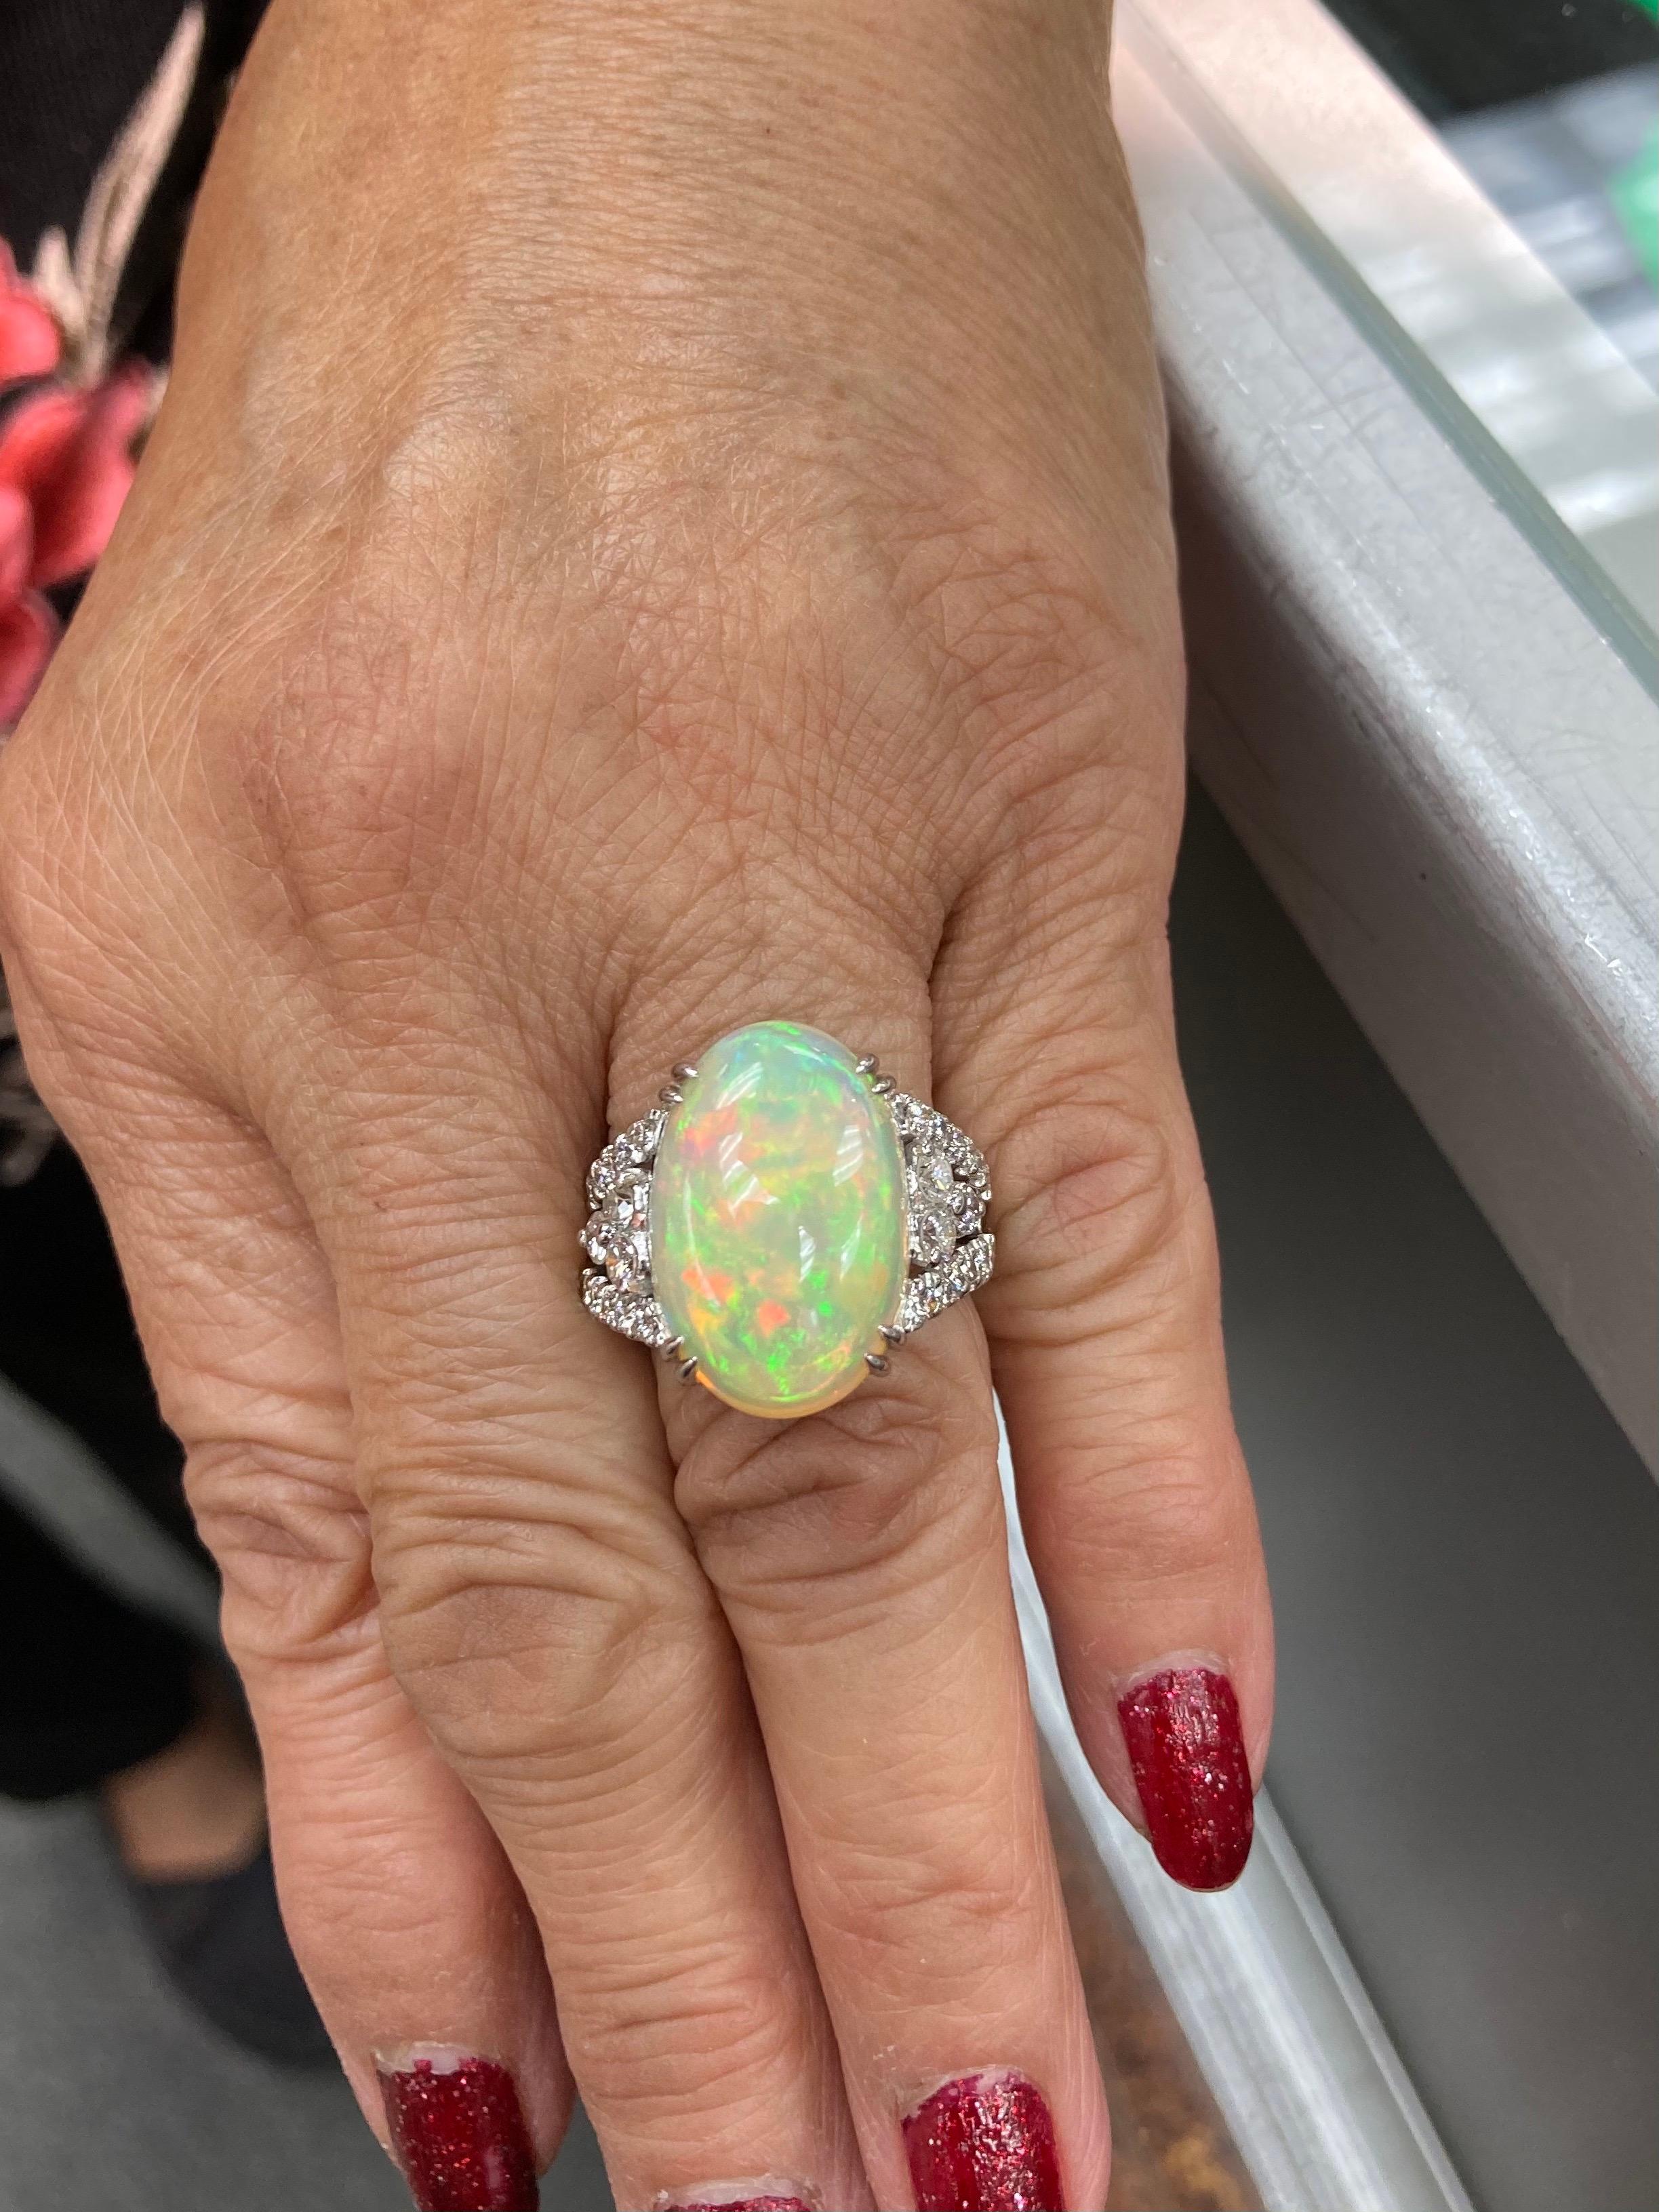 Opal diamond and platinum cocktail ring circa 2000.  Love it because it caught your eye, and we are here to connect you with beautiful and affordable jewelry.  Celebrate Yourself!  Simple and concise information you want to know is listed below. 